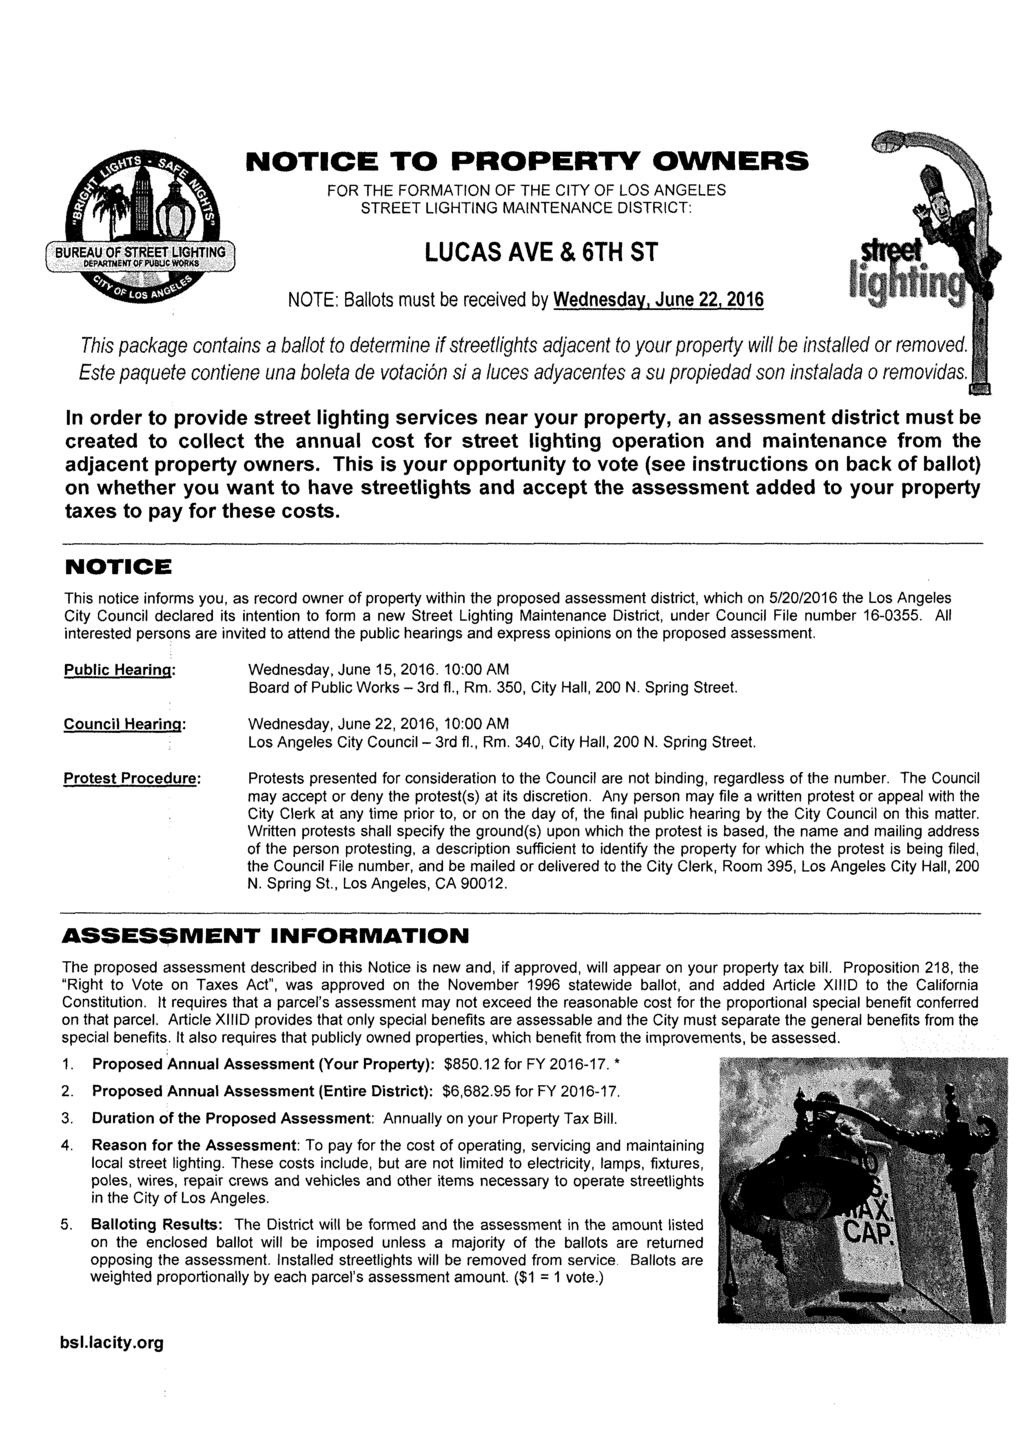 NOTICE TO PROPERTY OWNERS FOR THE FORMATION OF THE CITY OF LOS ANGELES STREET LIGHTING MAINTENANCE DISTRICT: 1 \ A BUREAU OF STREET LIGHTING v=,ptowmeirr.orjpi^uc-woiw»-i:>". - v-.